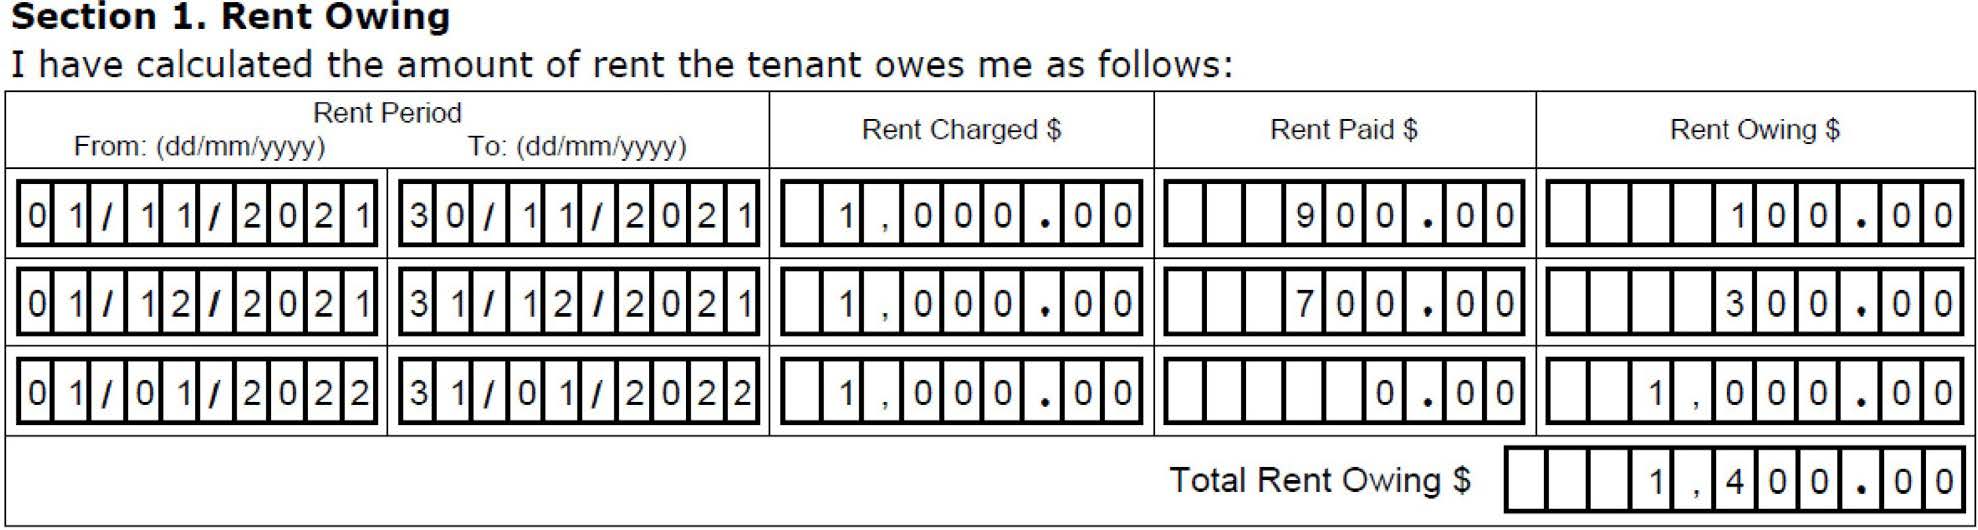 Part 4 rent owing visual example showing fields on the form being completed as described in this example.